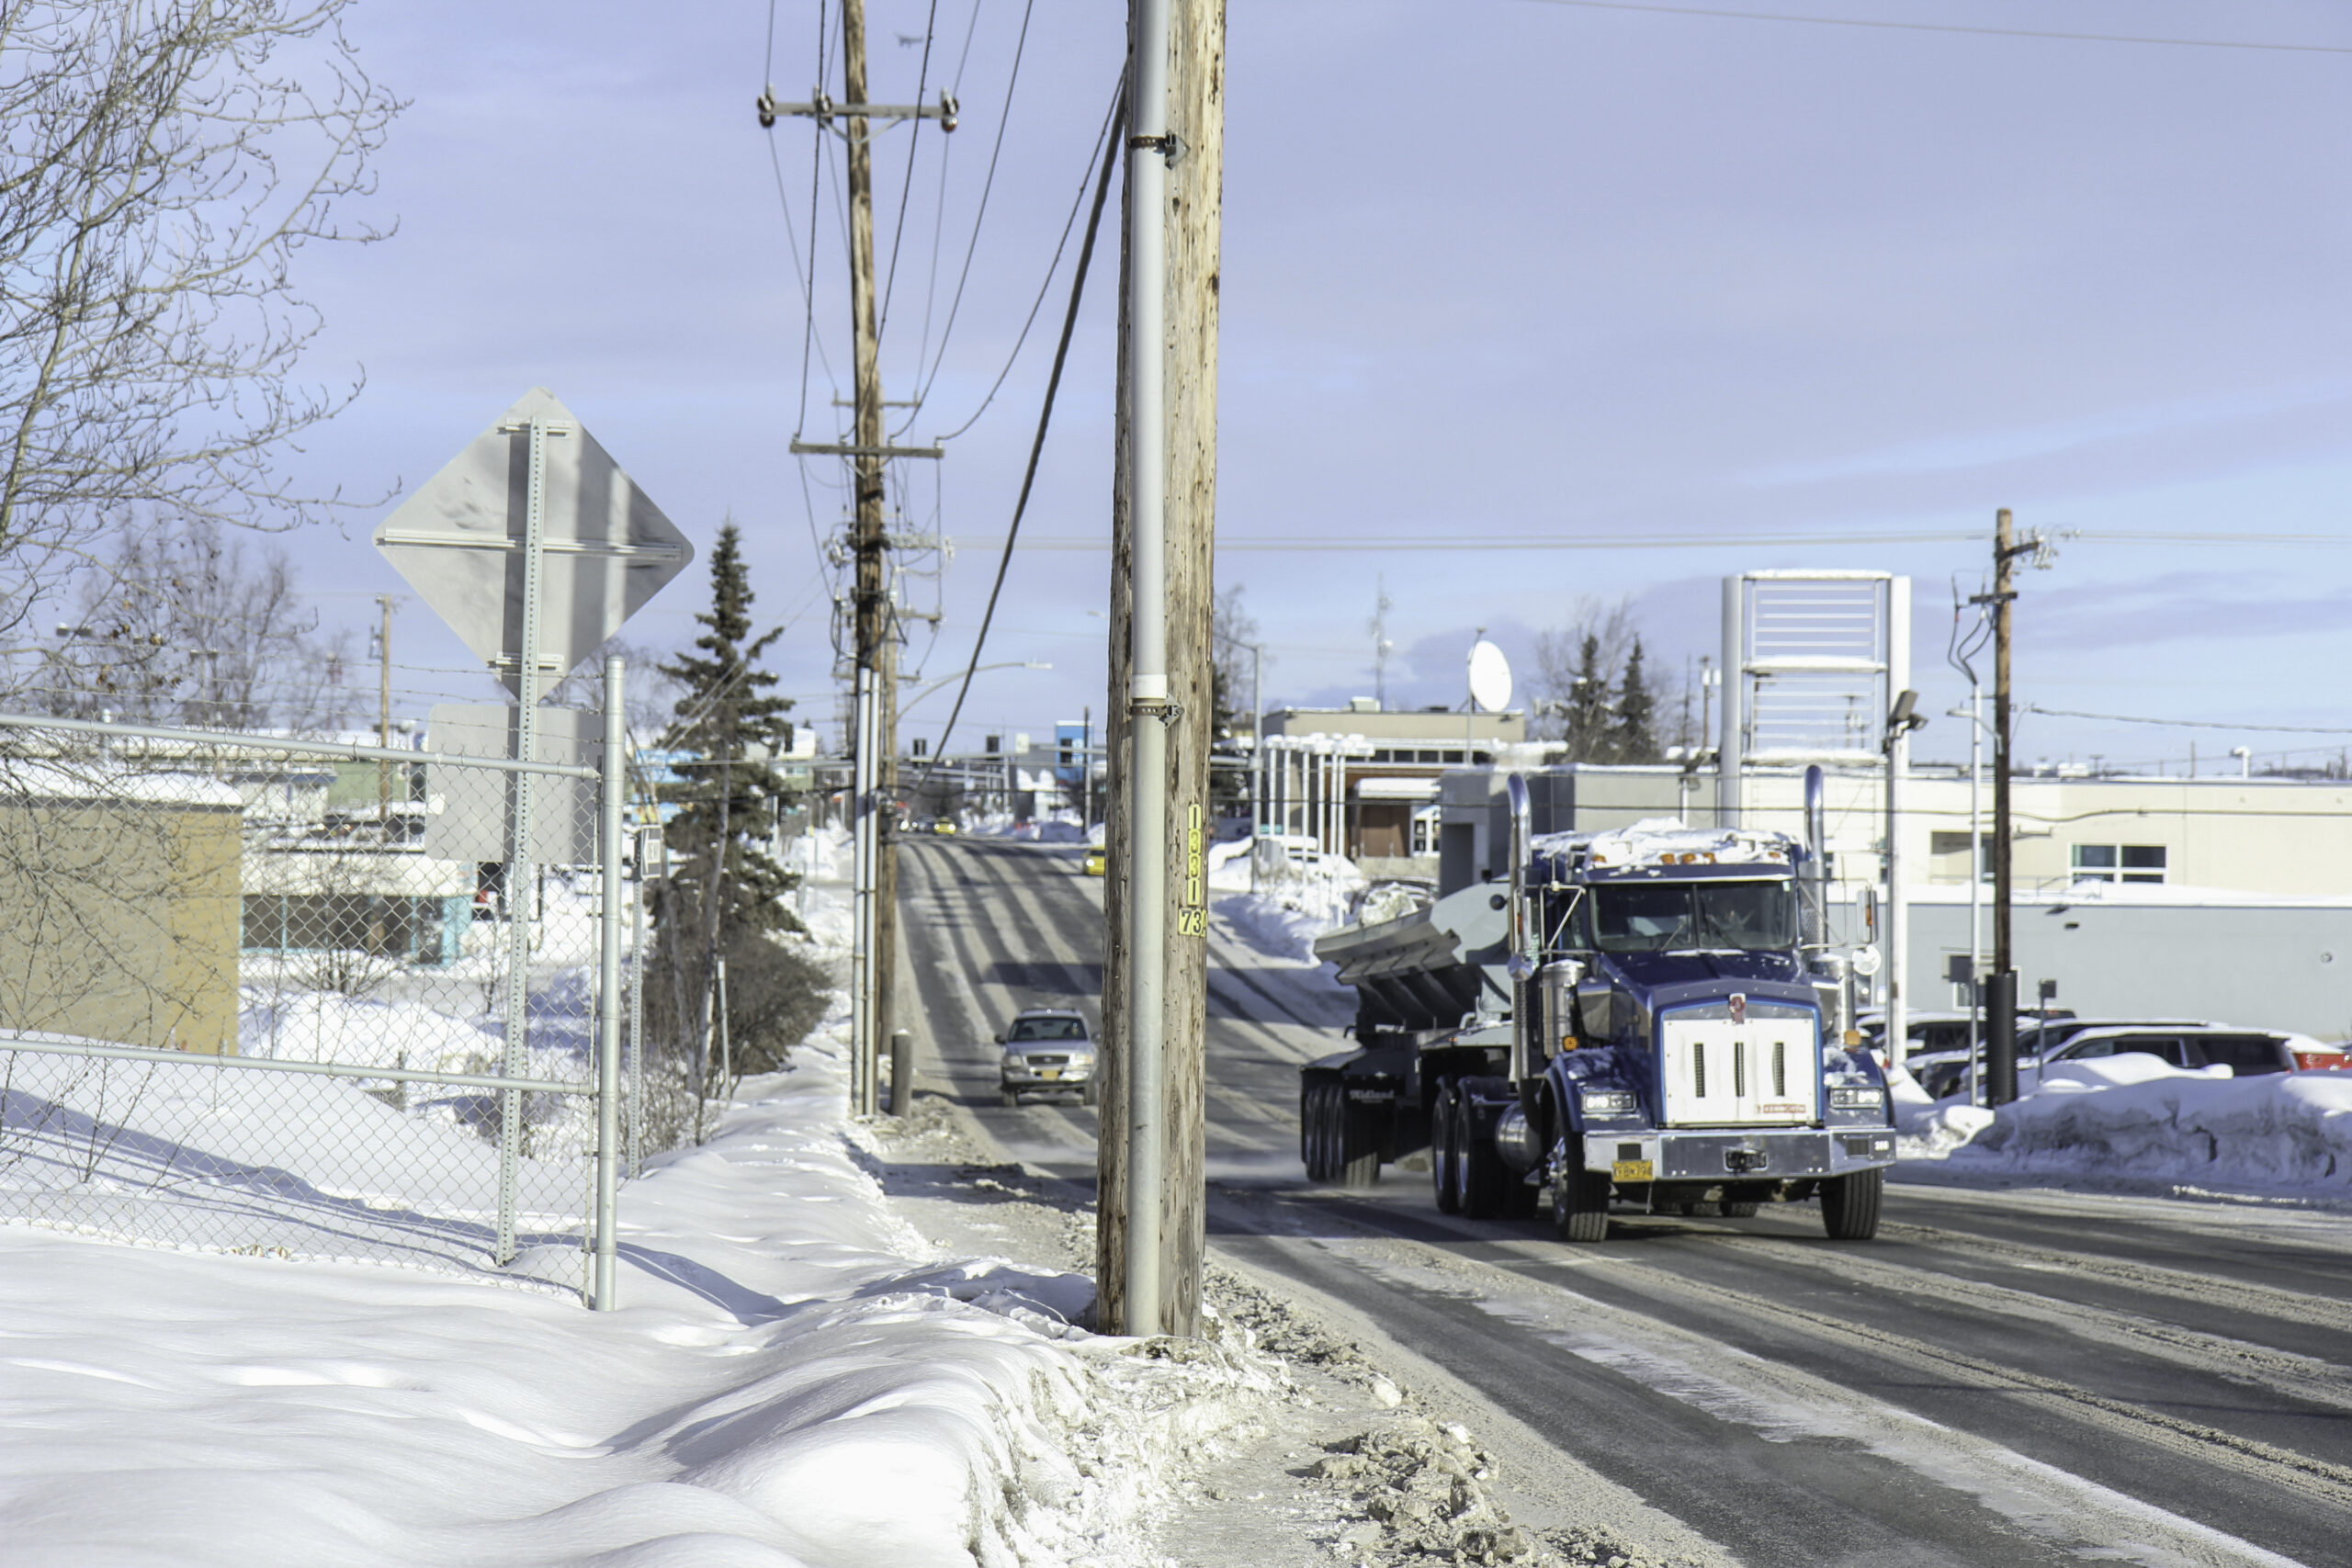 A sense of place photo in the winter where a semi truck is on the right side of the photo where the road is and utility poles obstructing pedestrian sidewalks on a snow filled street.